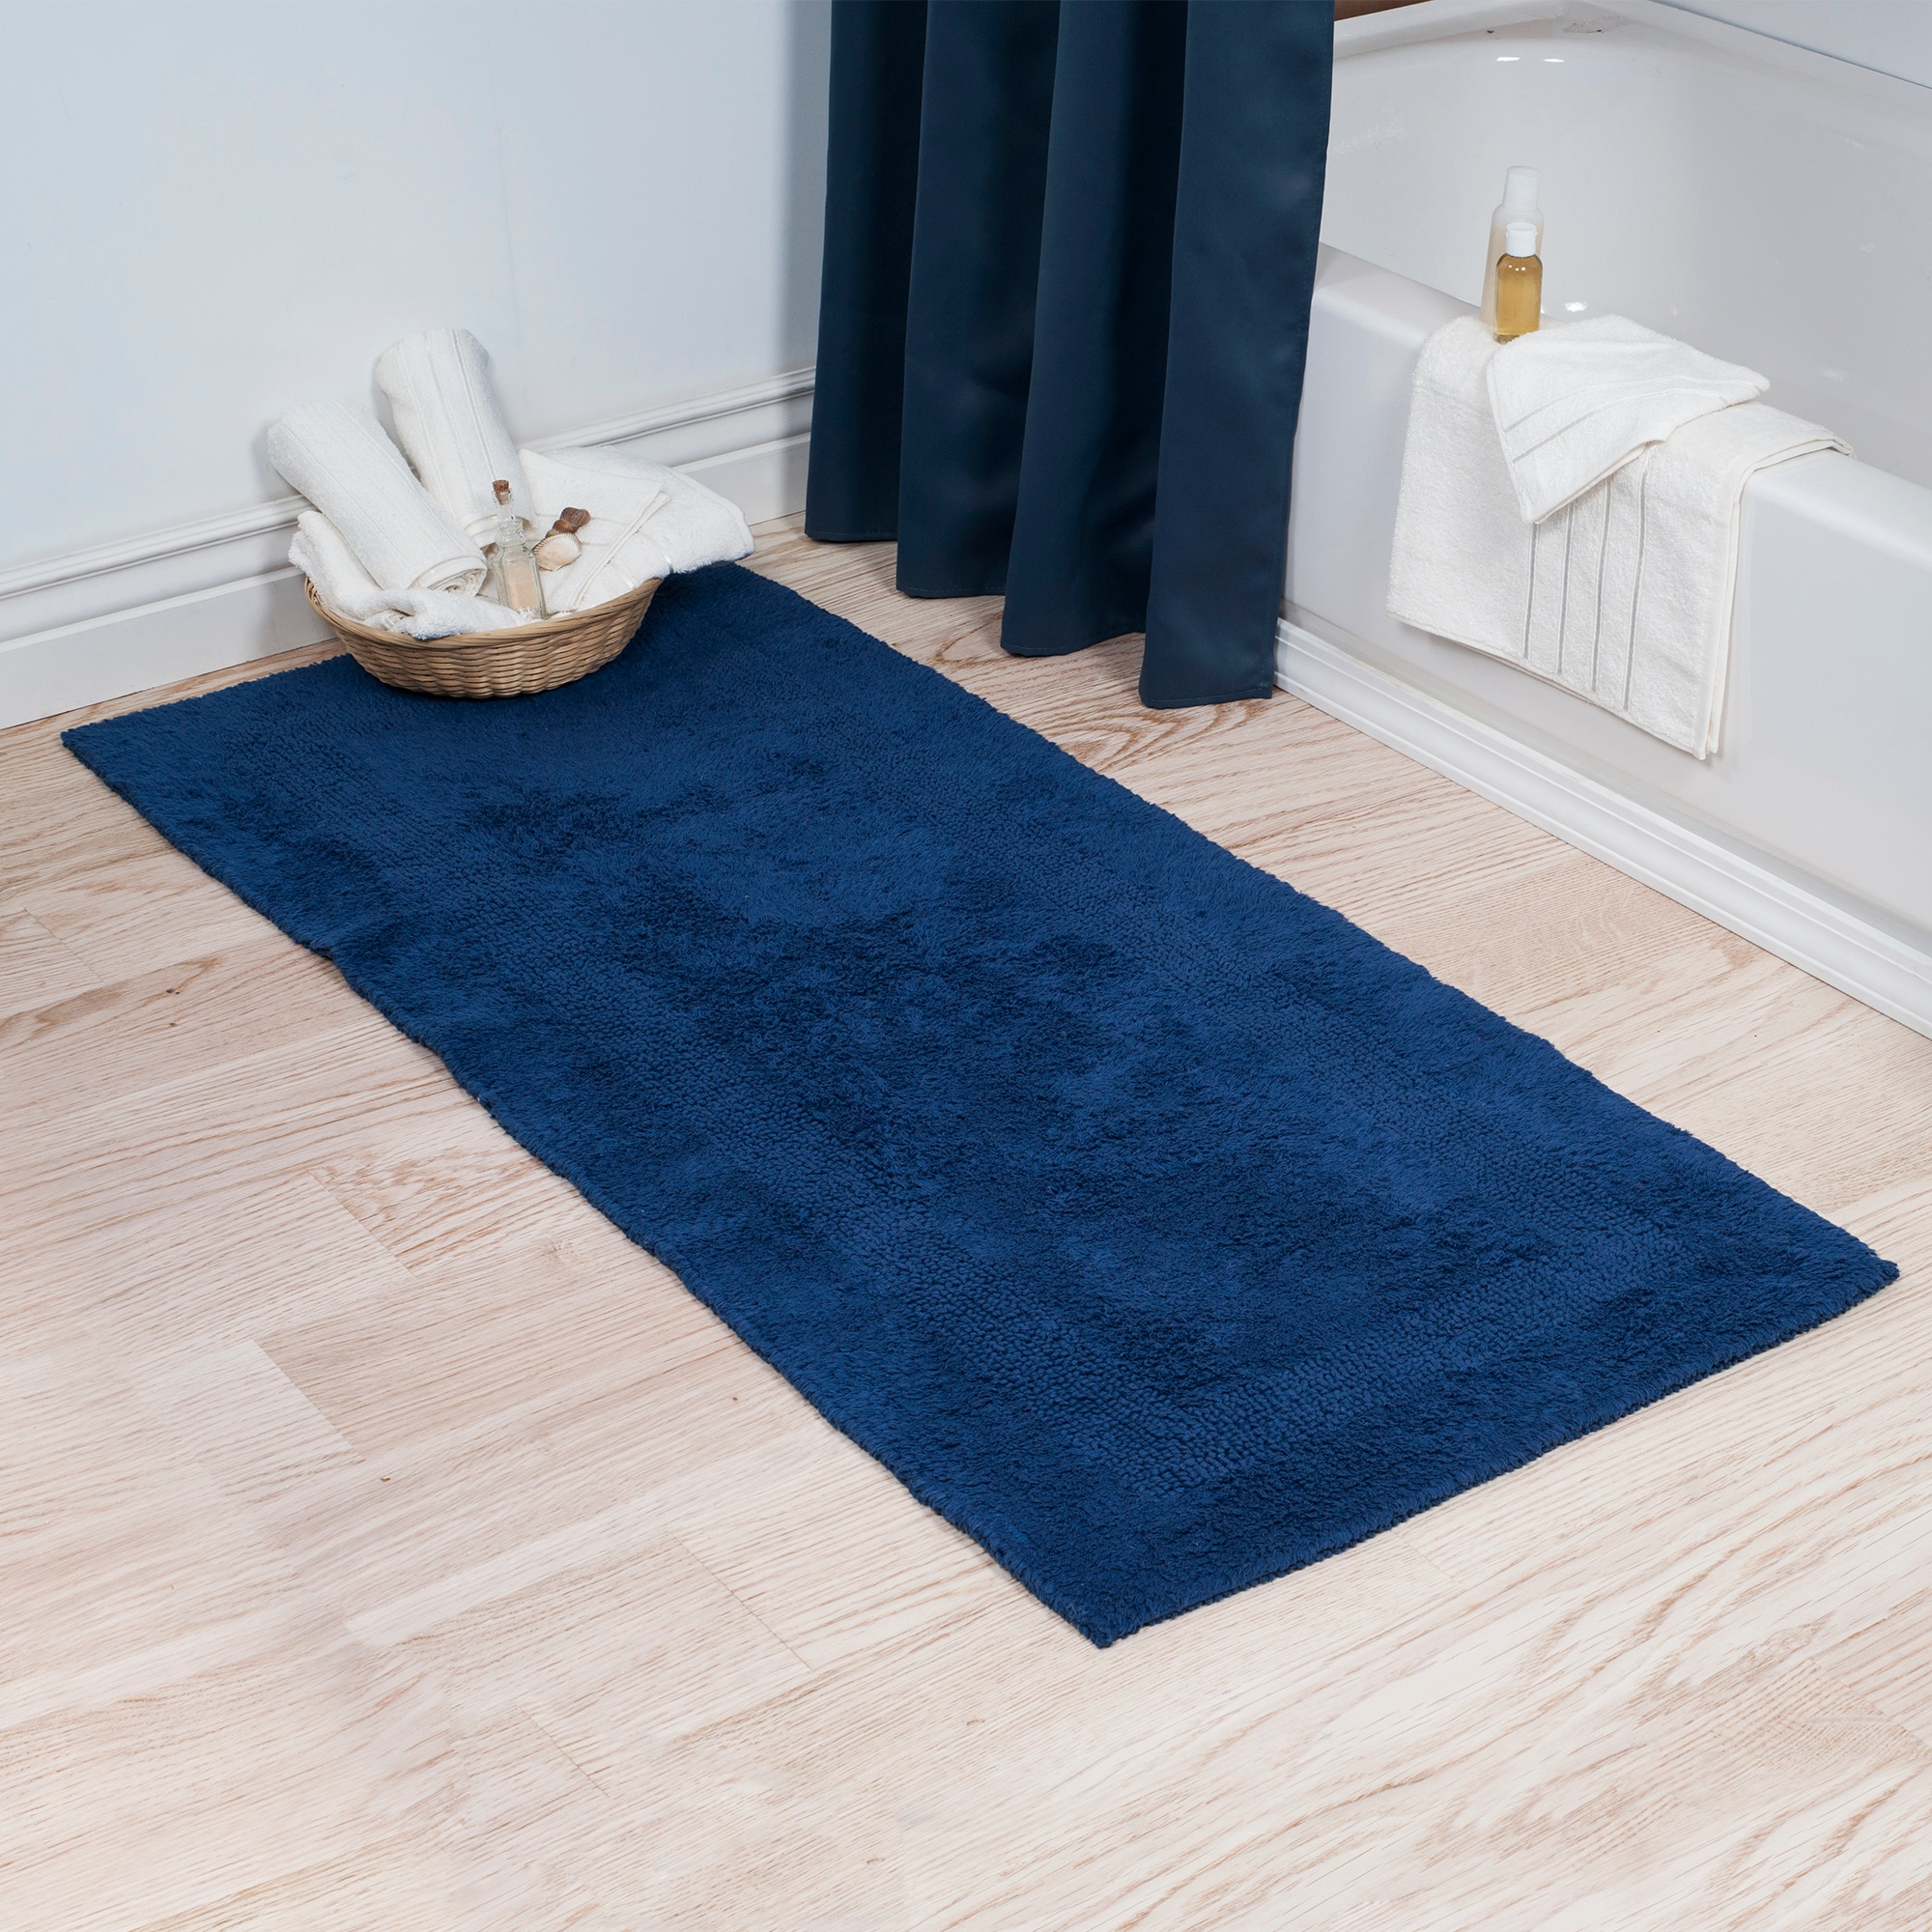 Classic Cotton Bath Mat in Navy Blue by Schoolhouse